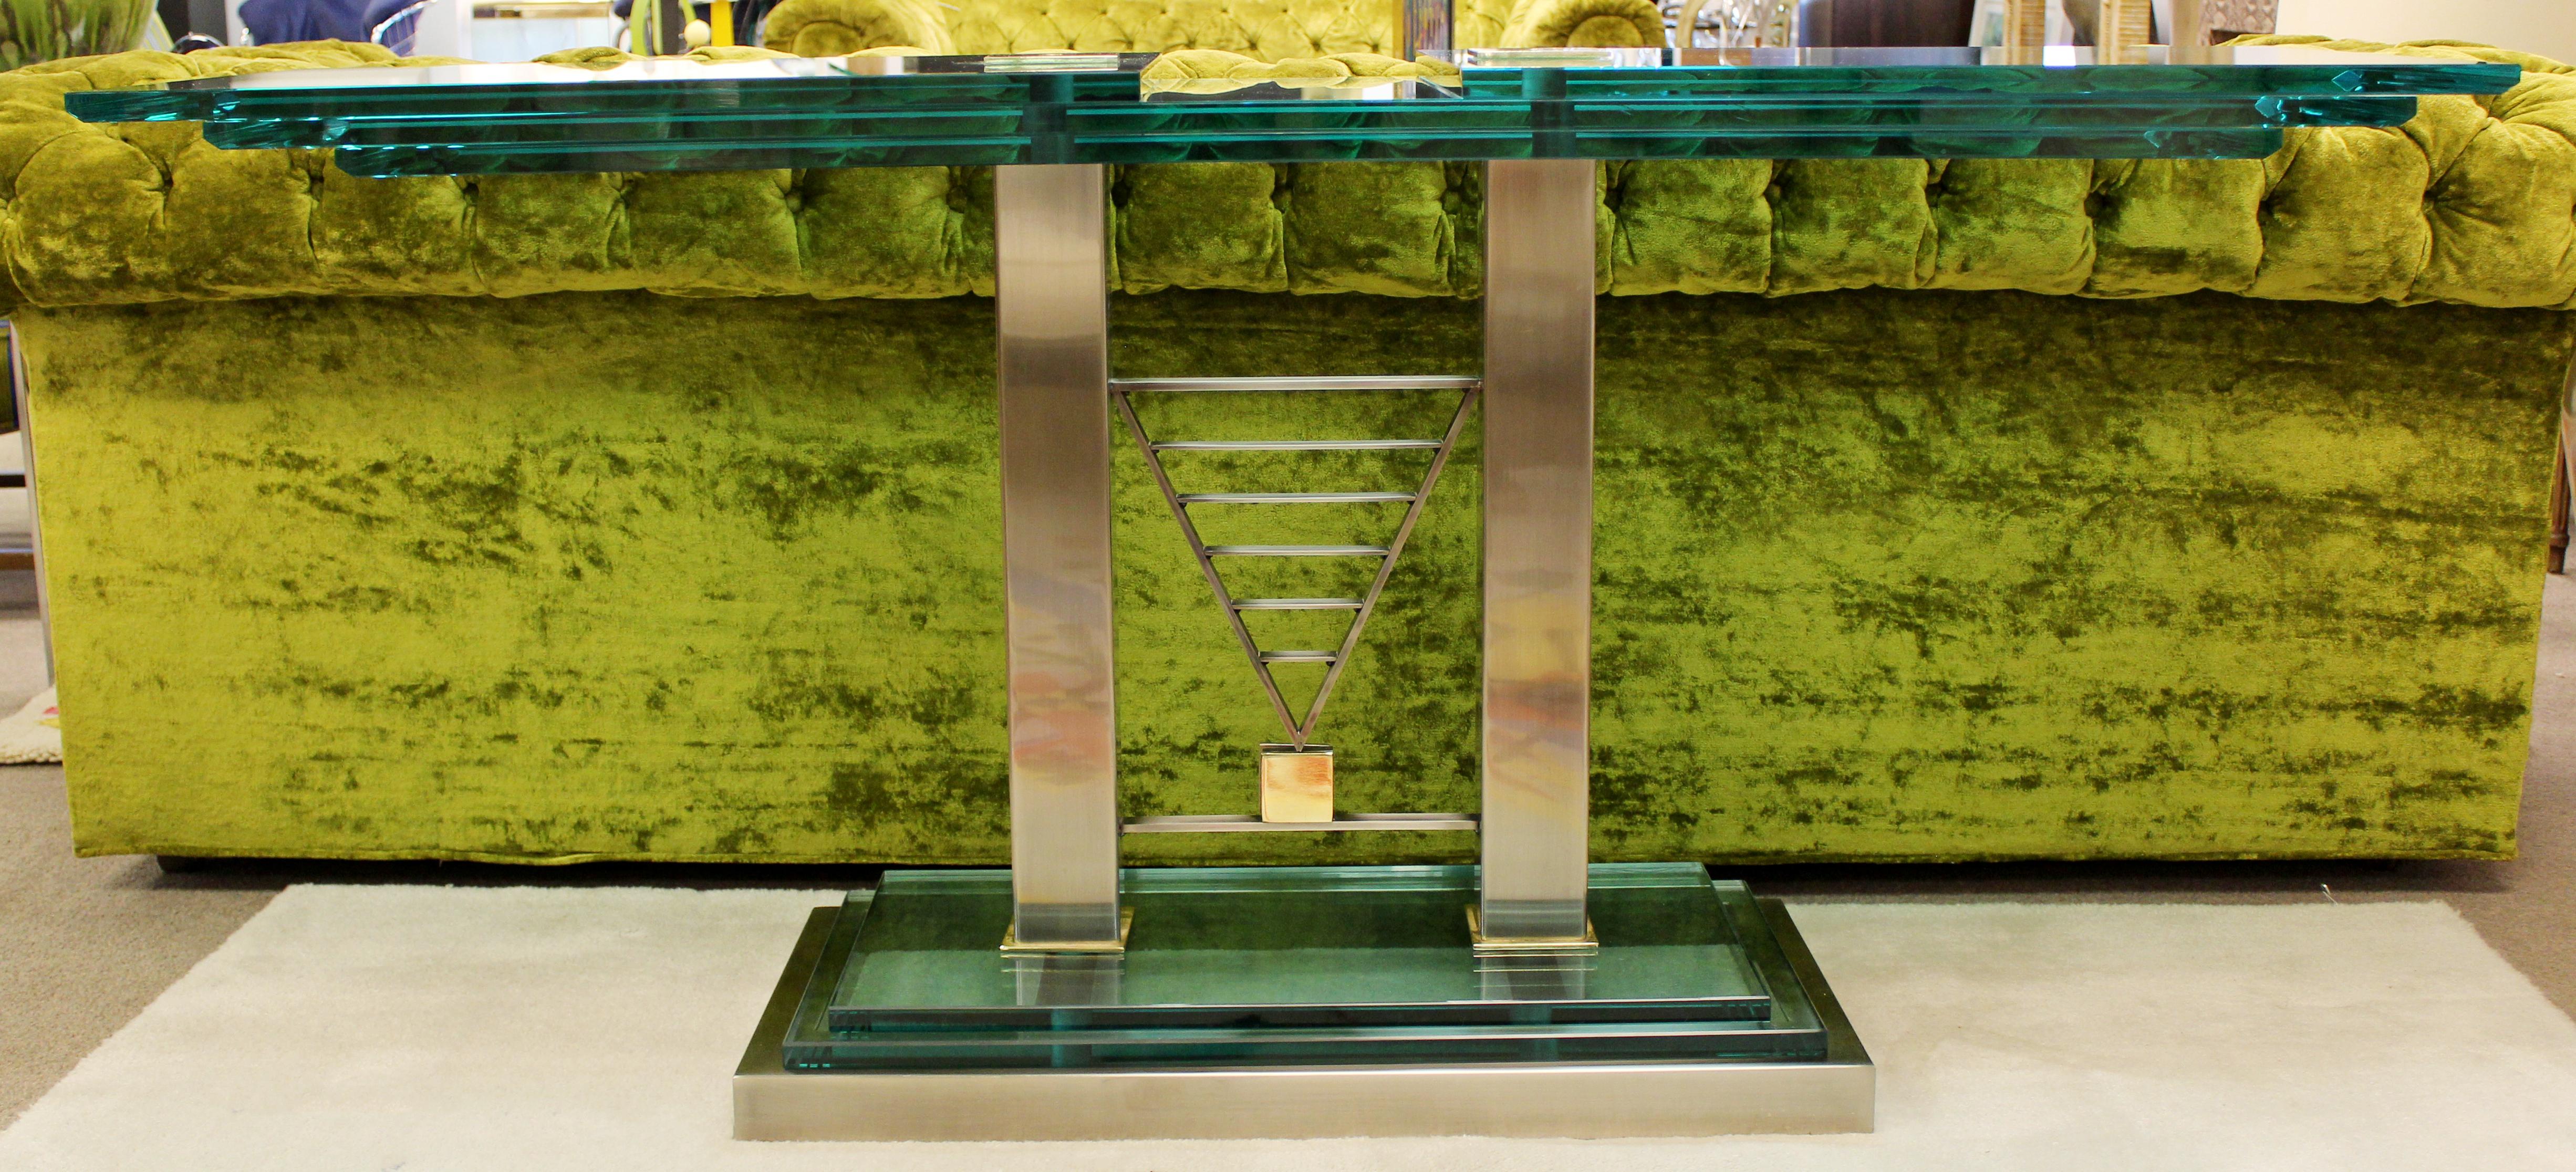 For your consideration is a magnificent DIA, Design Institiute of America, Art Deco style console table, made of glass, brass and chrome steel, circa 1990s, excellent condition. The dimensions are 59.5